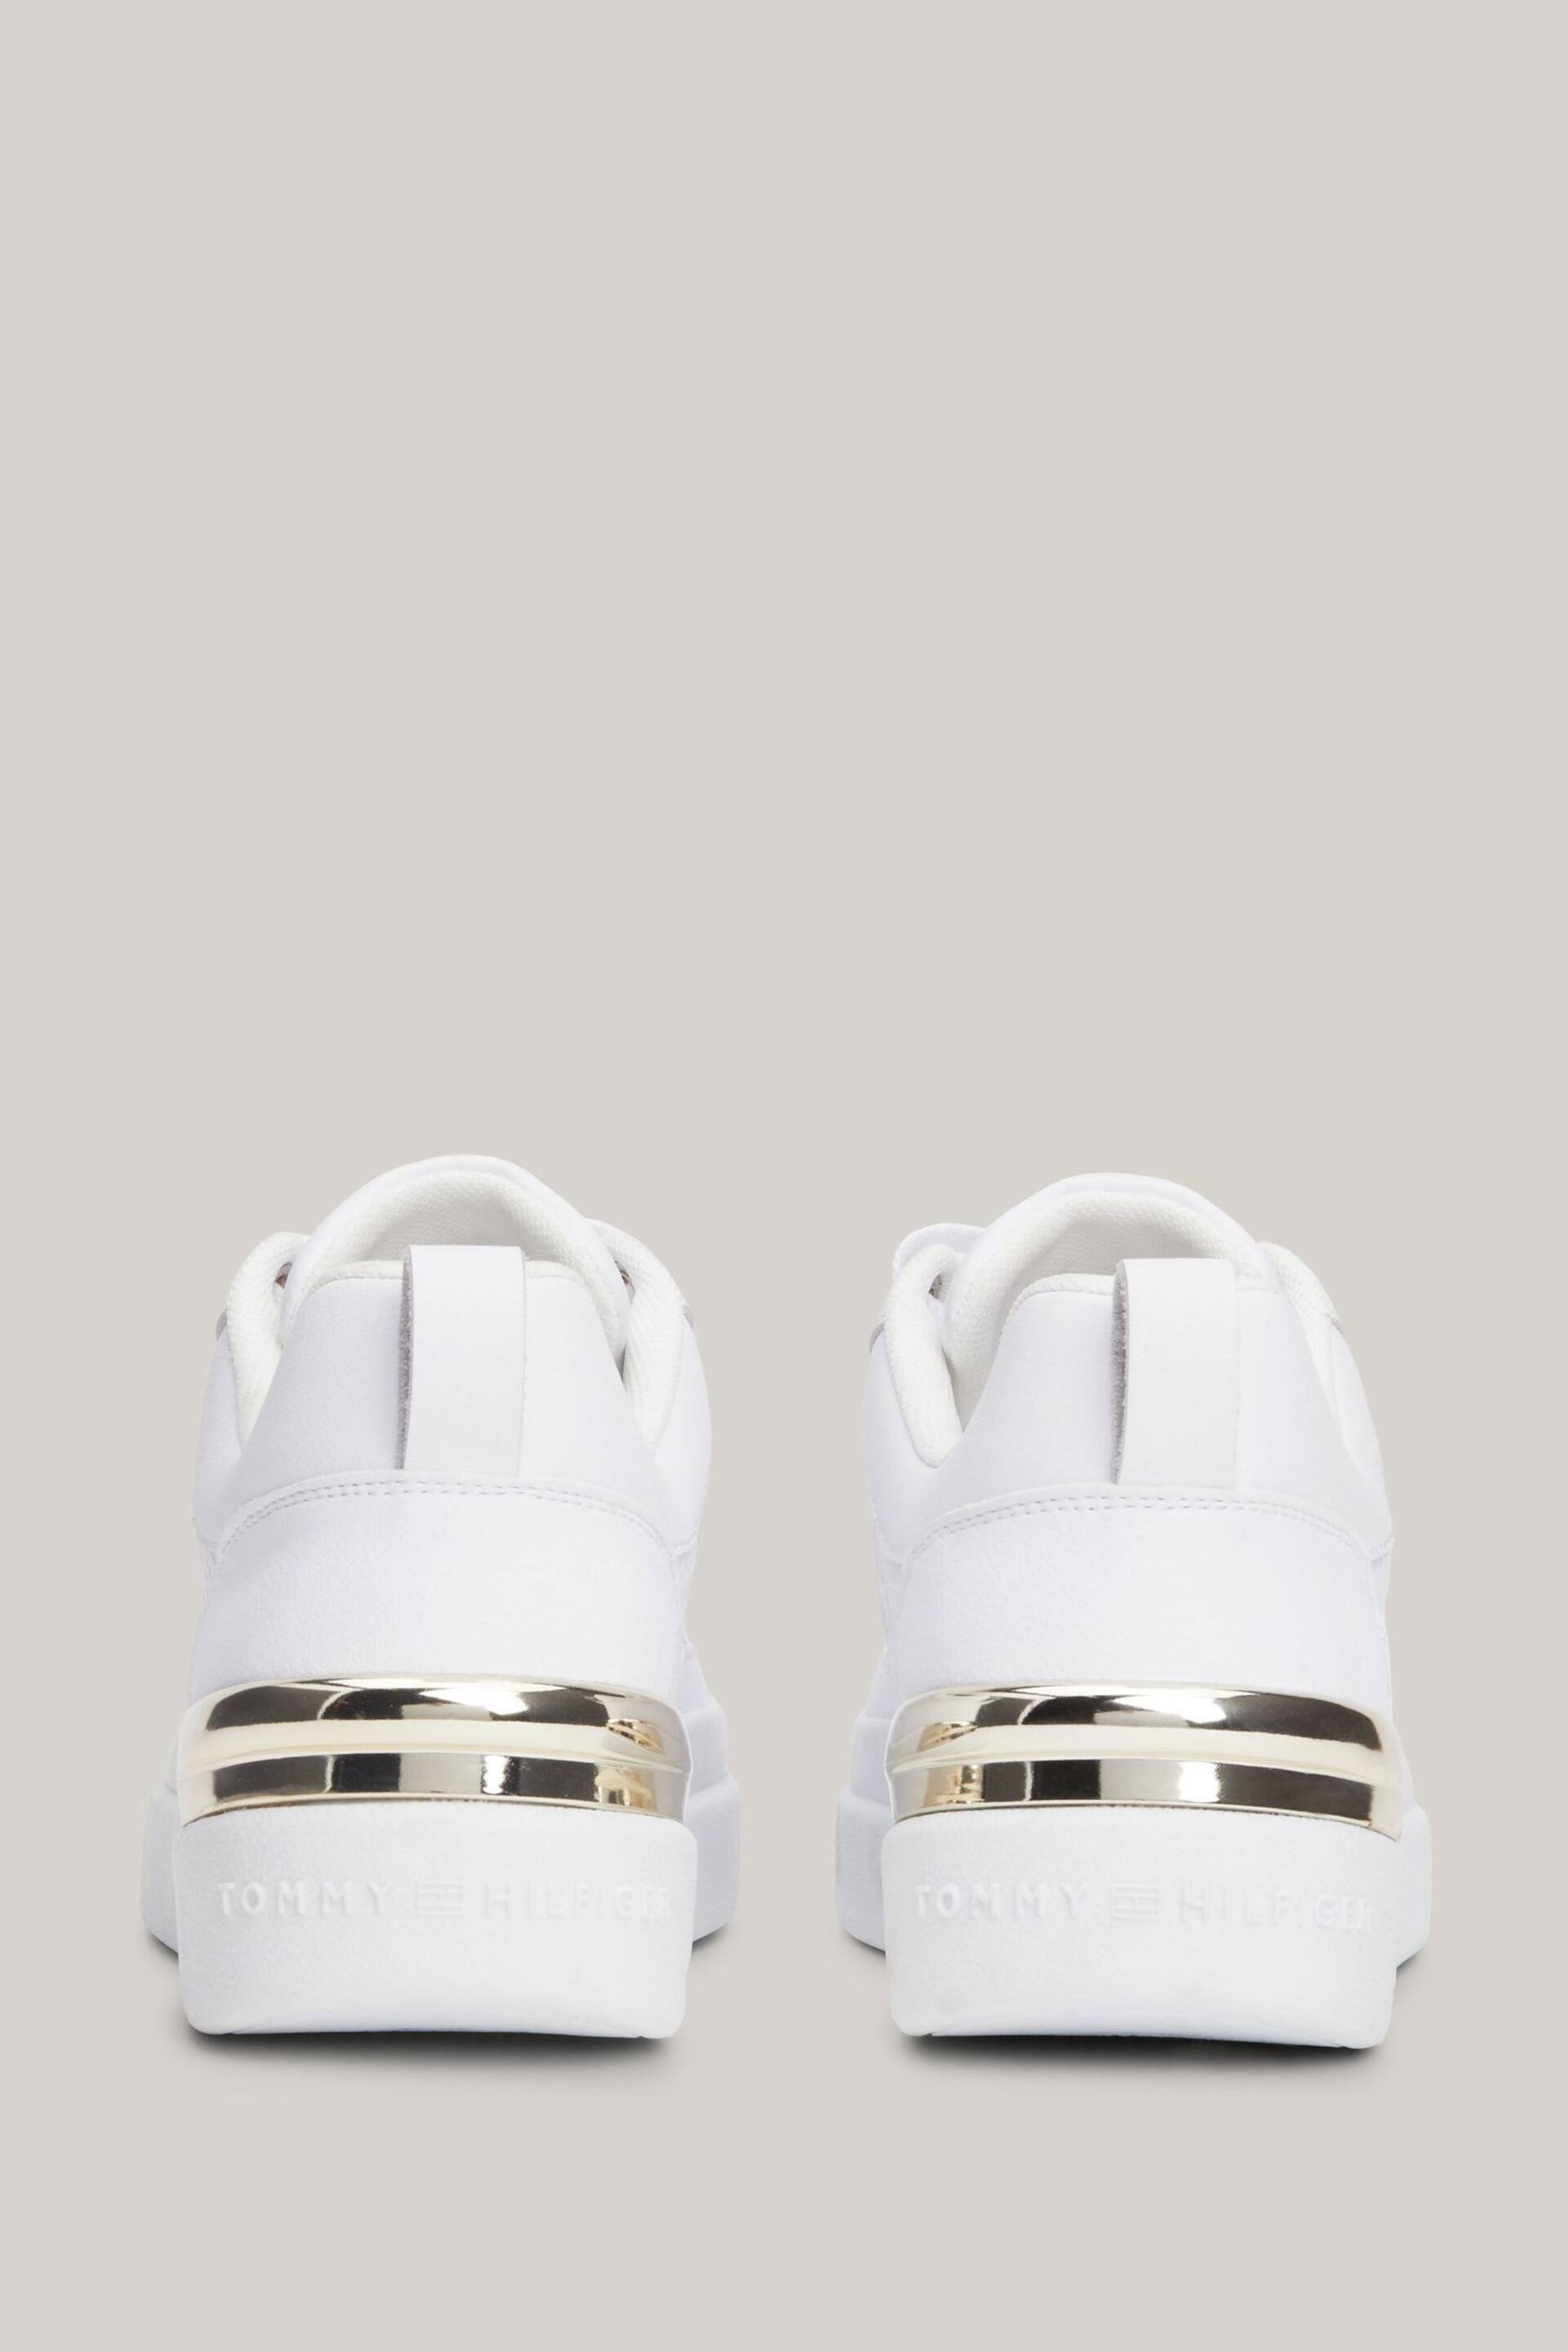 Tommy Hilfiger Lux Court White Sneakers - Image 4 of 5